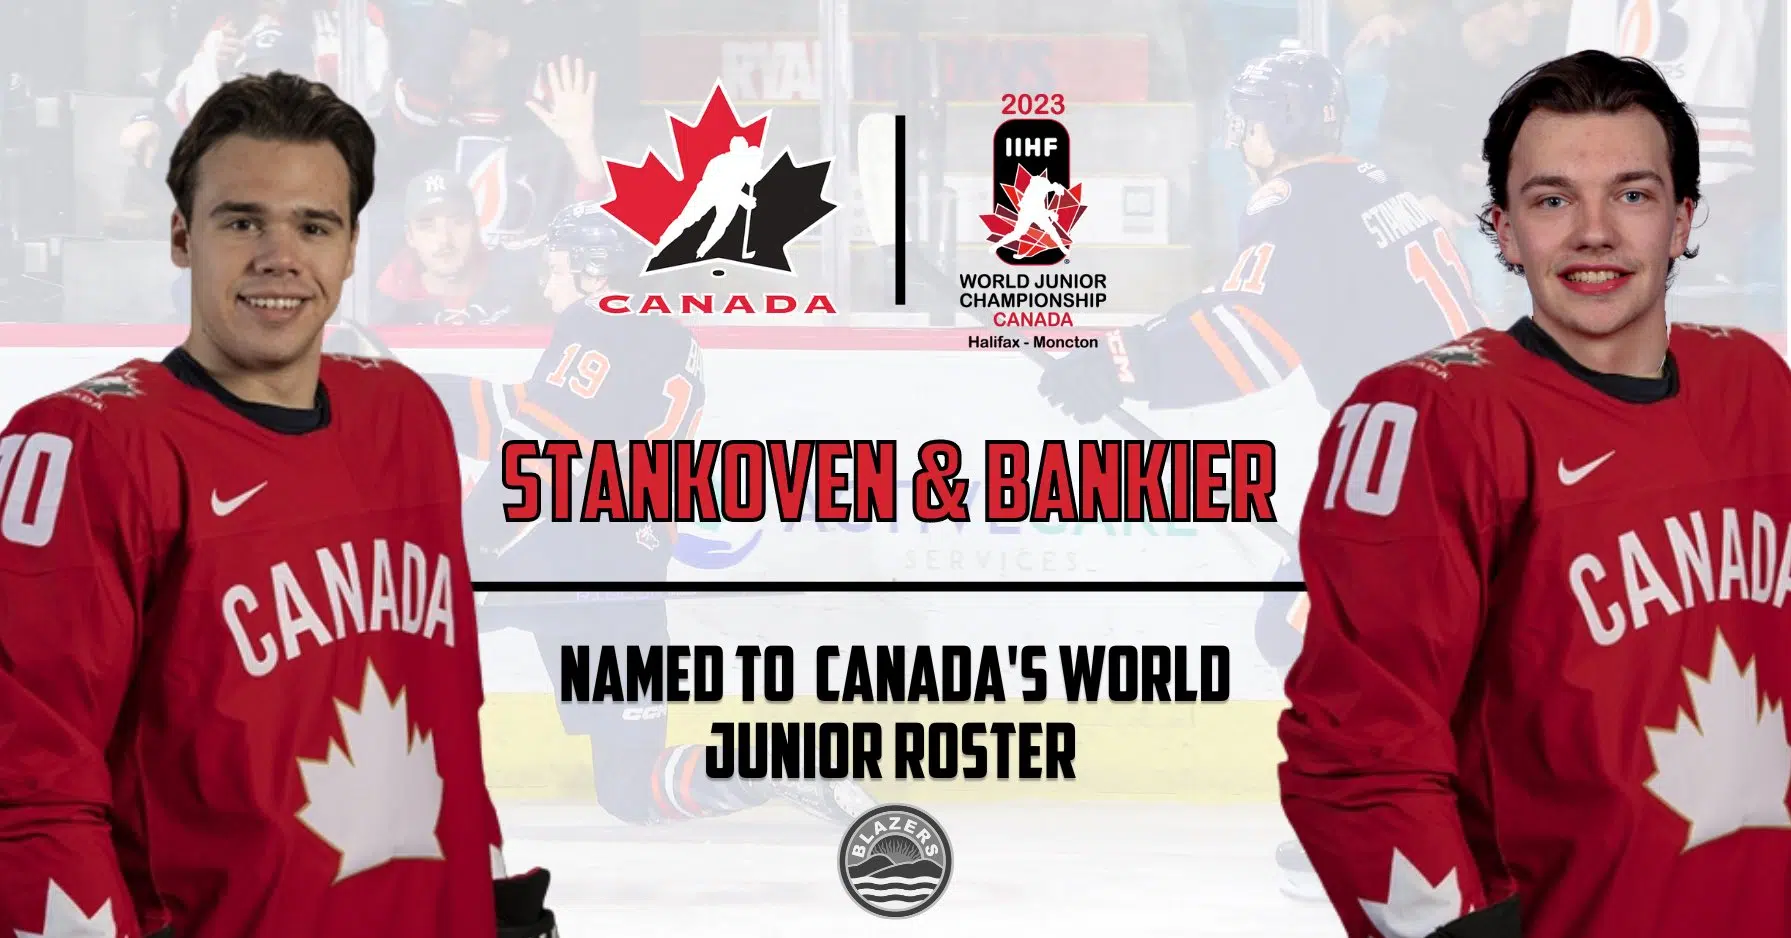 Blazers with two players to represent Canada at World Juniors